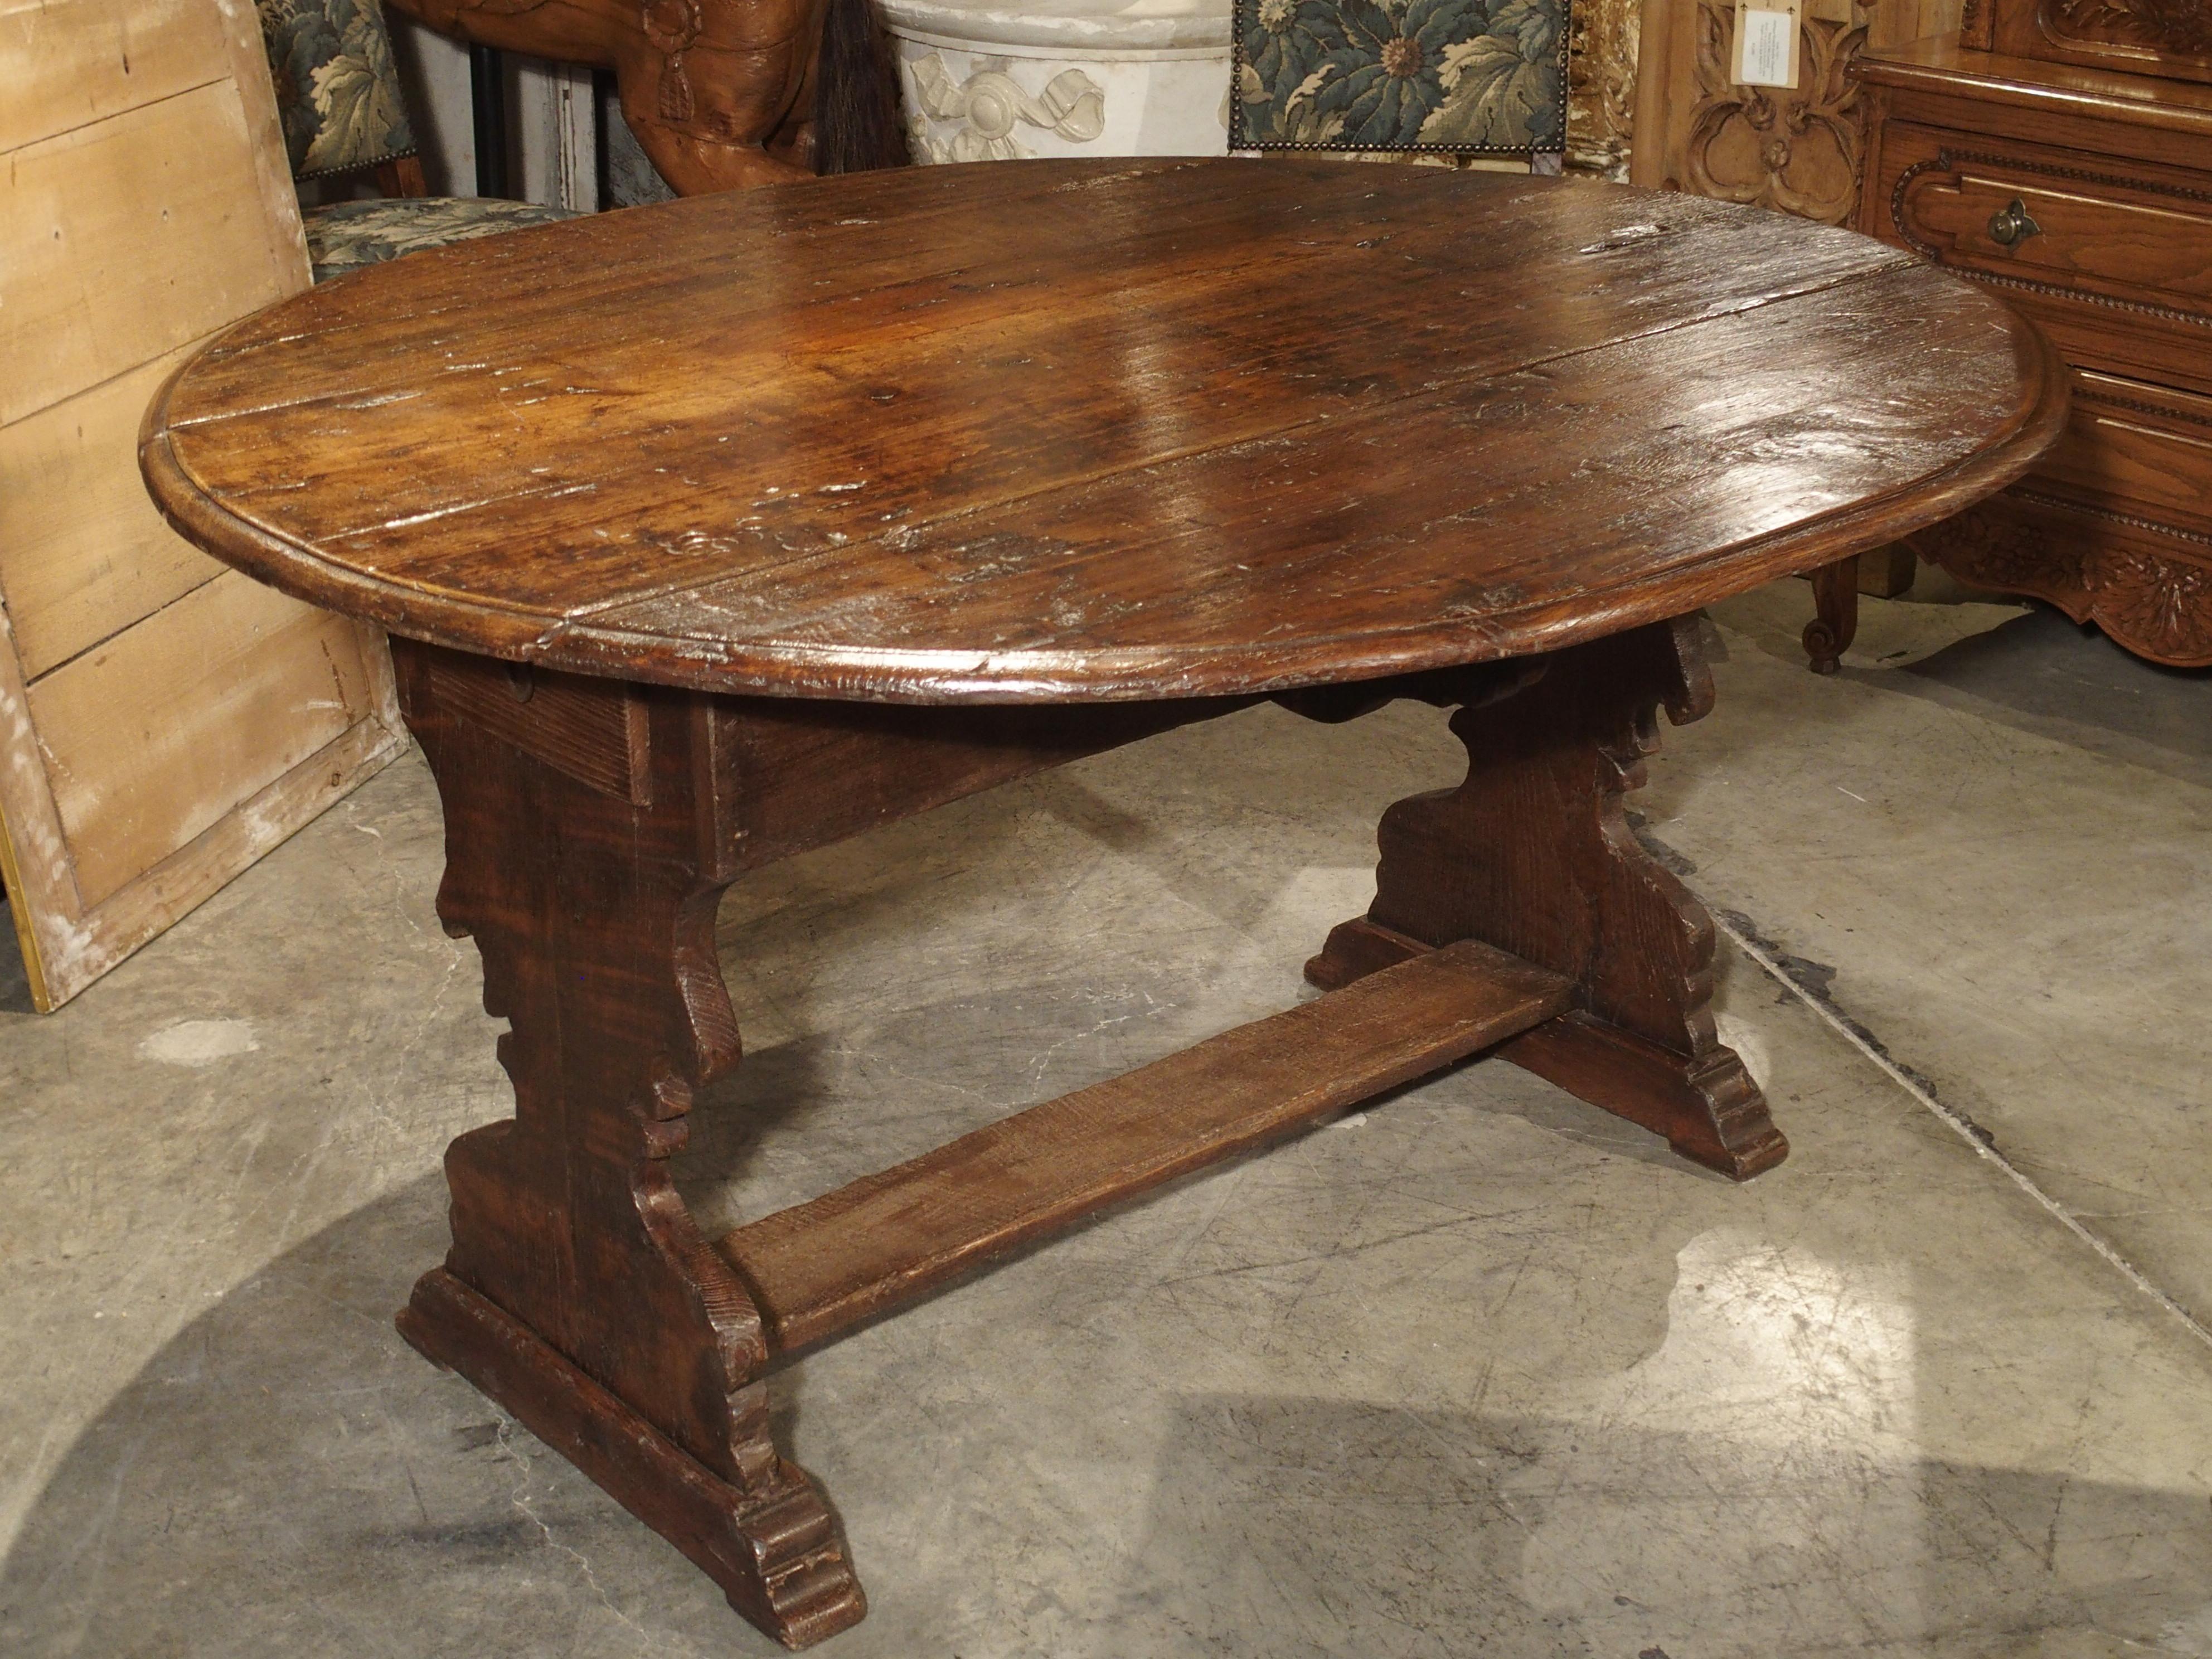 Italian Antique Chestnut Wood Drop Leaf Table from Italy, circa 1790